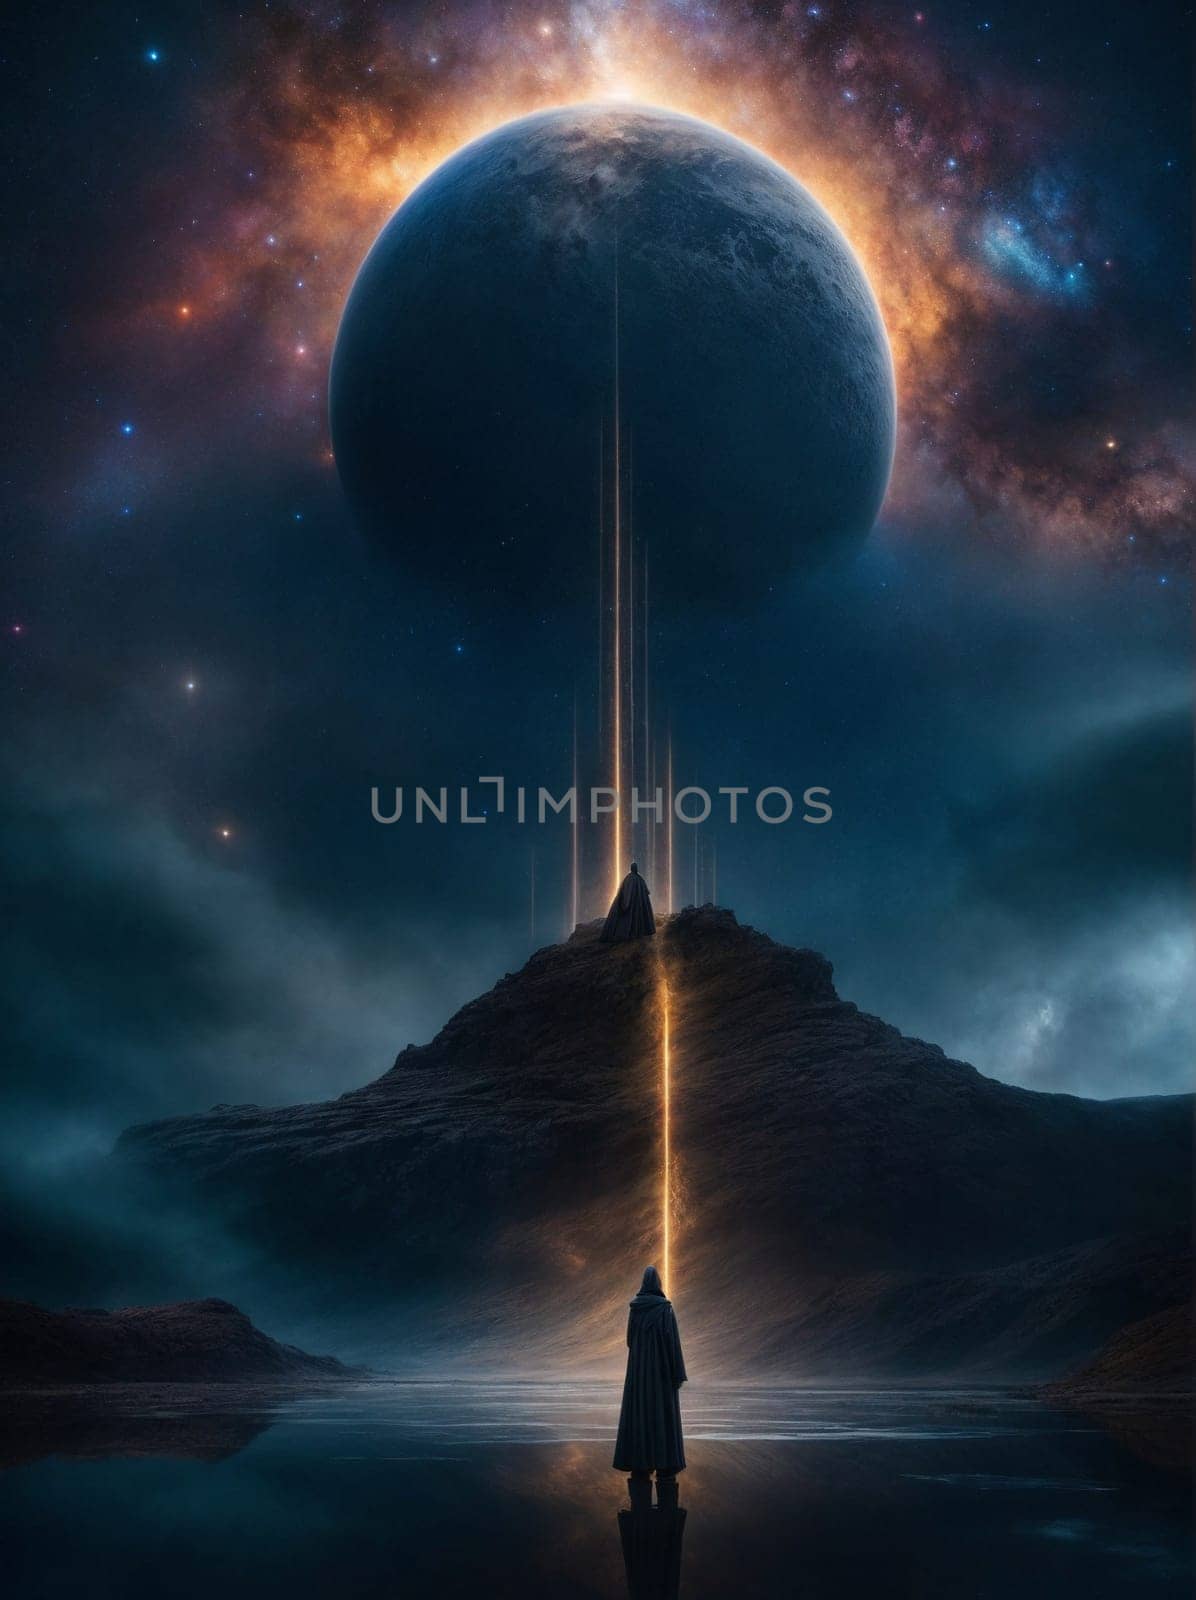 A powerful image capturing a man amidst a vast expanse of stars, symbolizing the grandeur and connection between humanity and the universe.